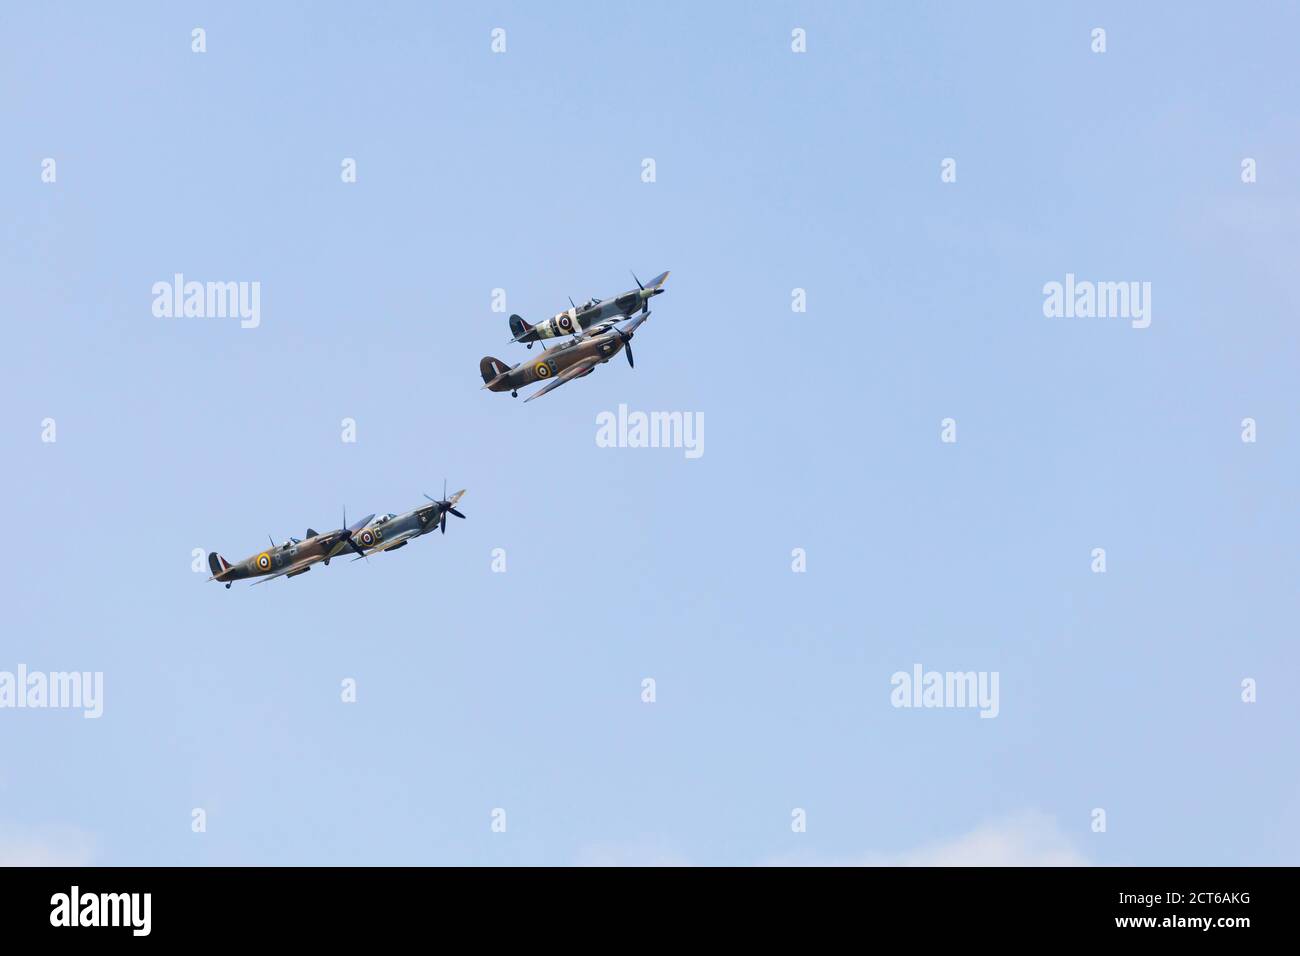 Formation of Spitfires and Hurricane of the Battle of Britain Memorial Flight, on the 80th anniversary flypast. 20th September 2020. Stock Photo